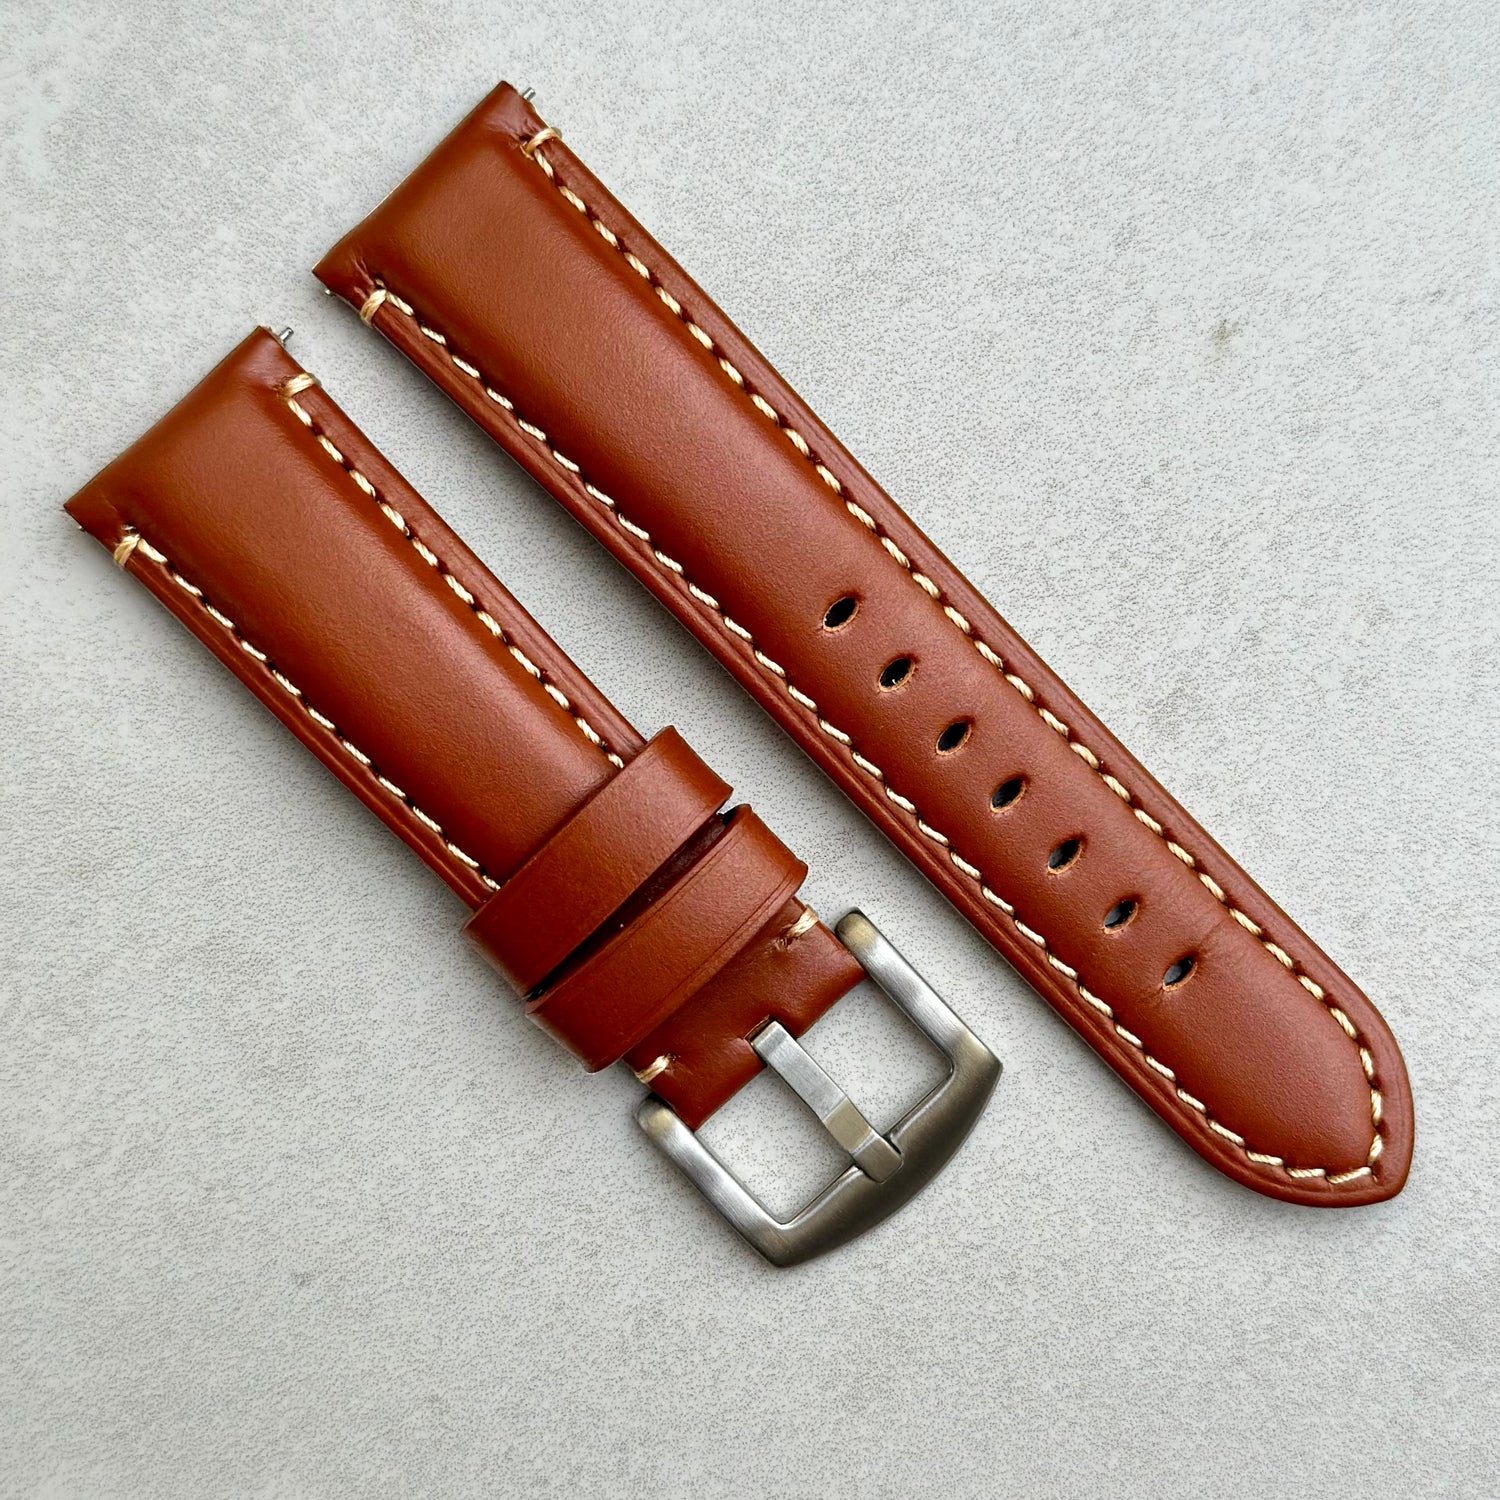 Oslo dark caramel brown full grain leather watch strap placed diagonally on a grey background. Contrast ivory stitching. Brushed 316L stainless steel buckle. 